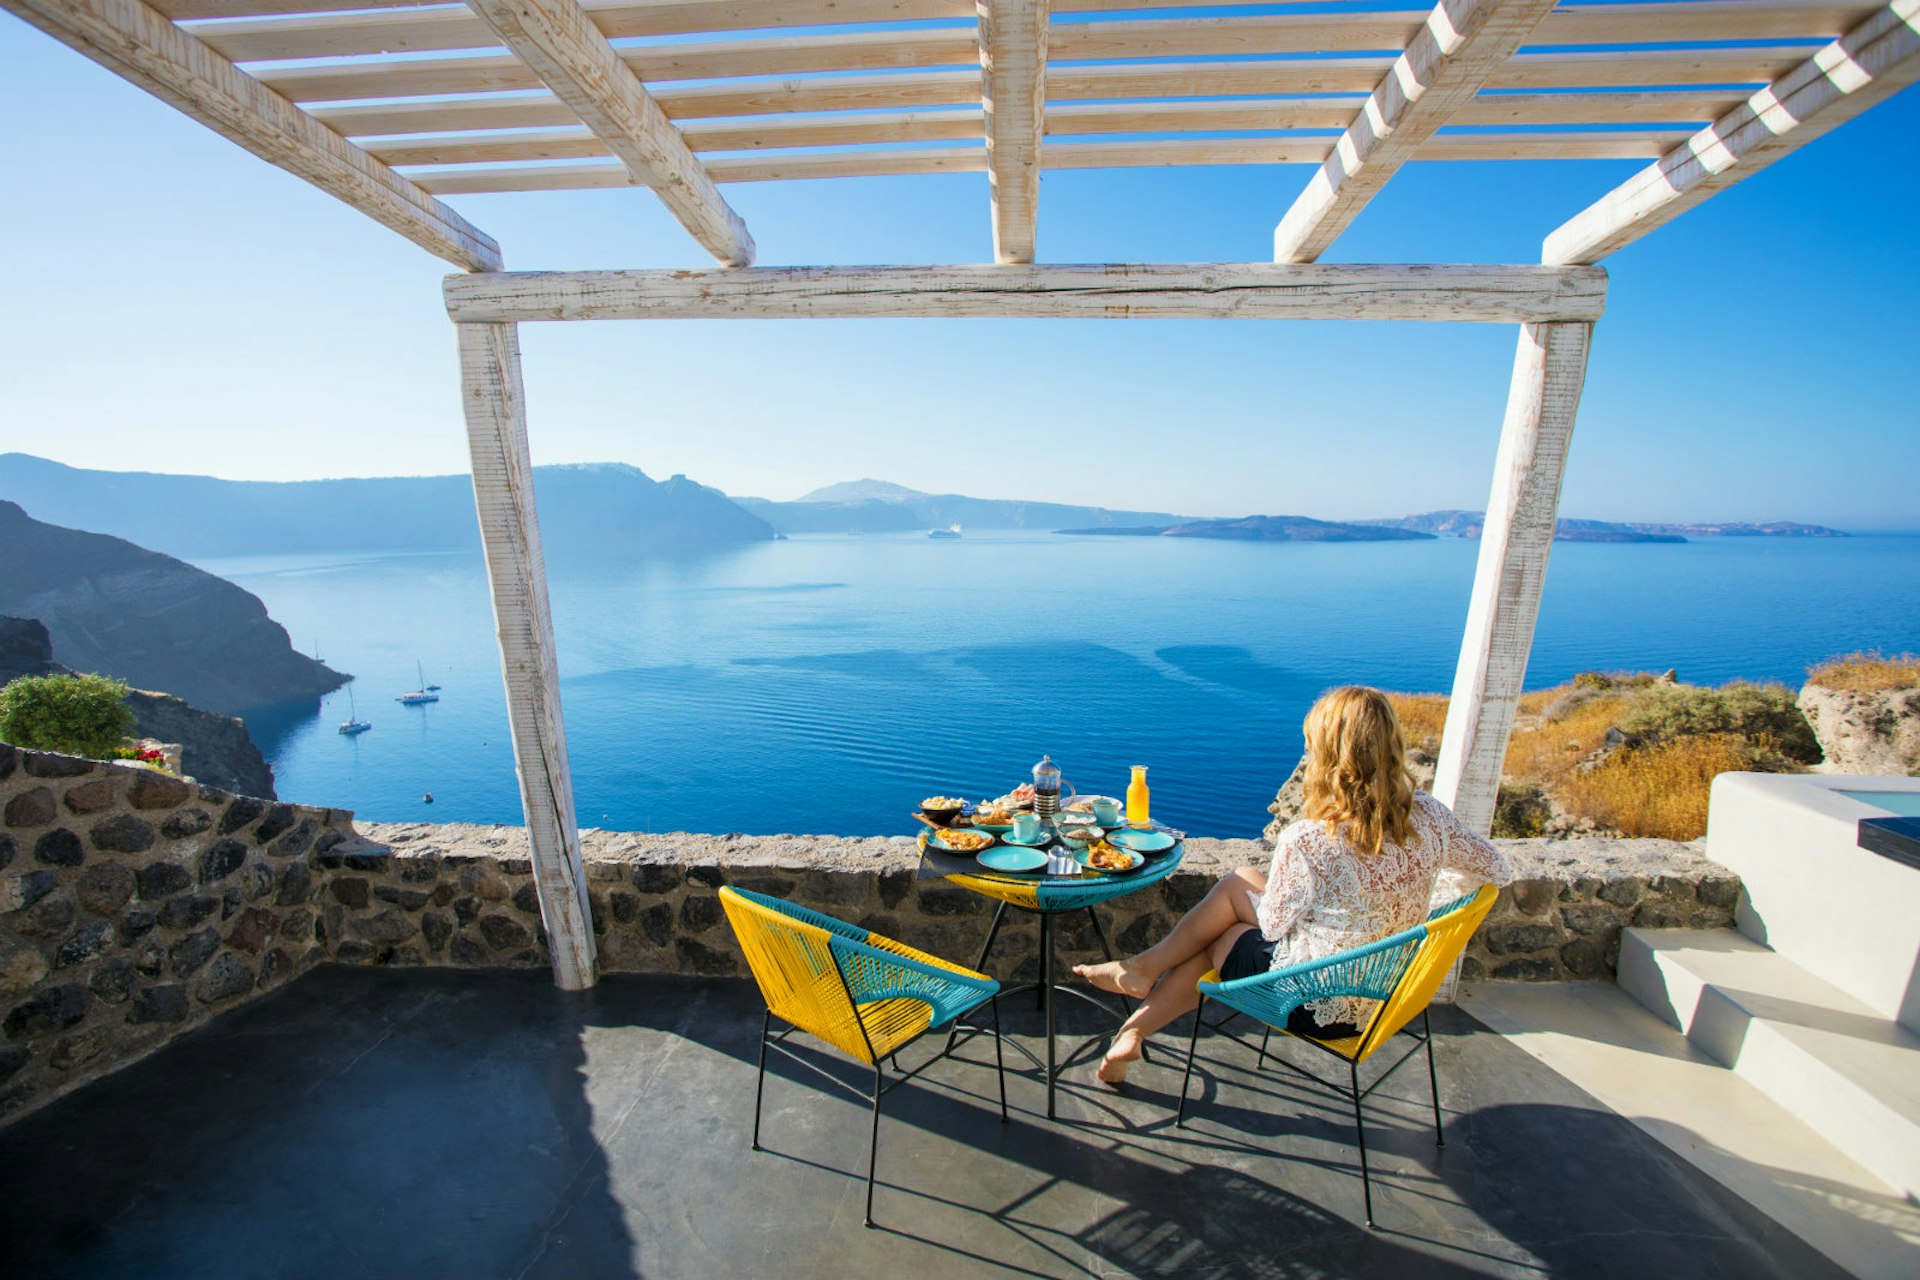 Romantic trip with kids in tow – A woman looks out over the Santorini coastline from the breakfast table.